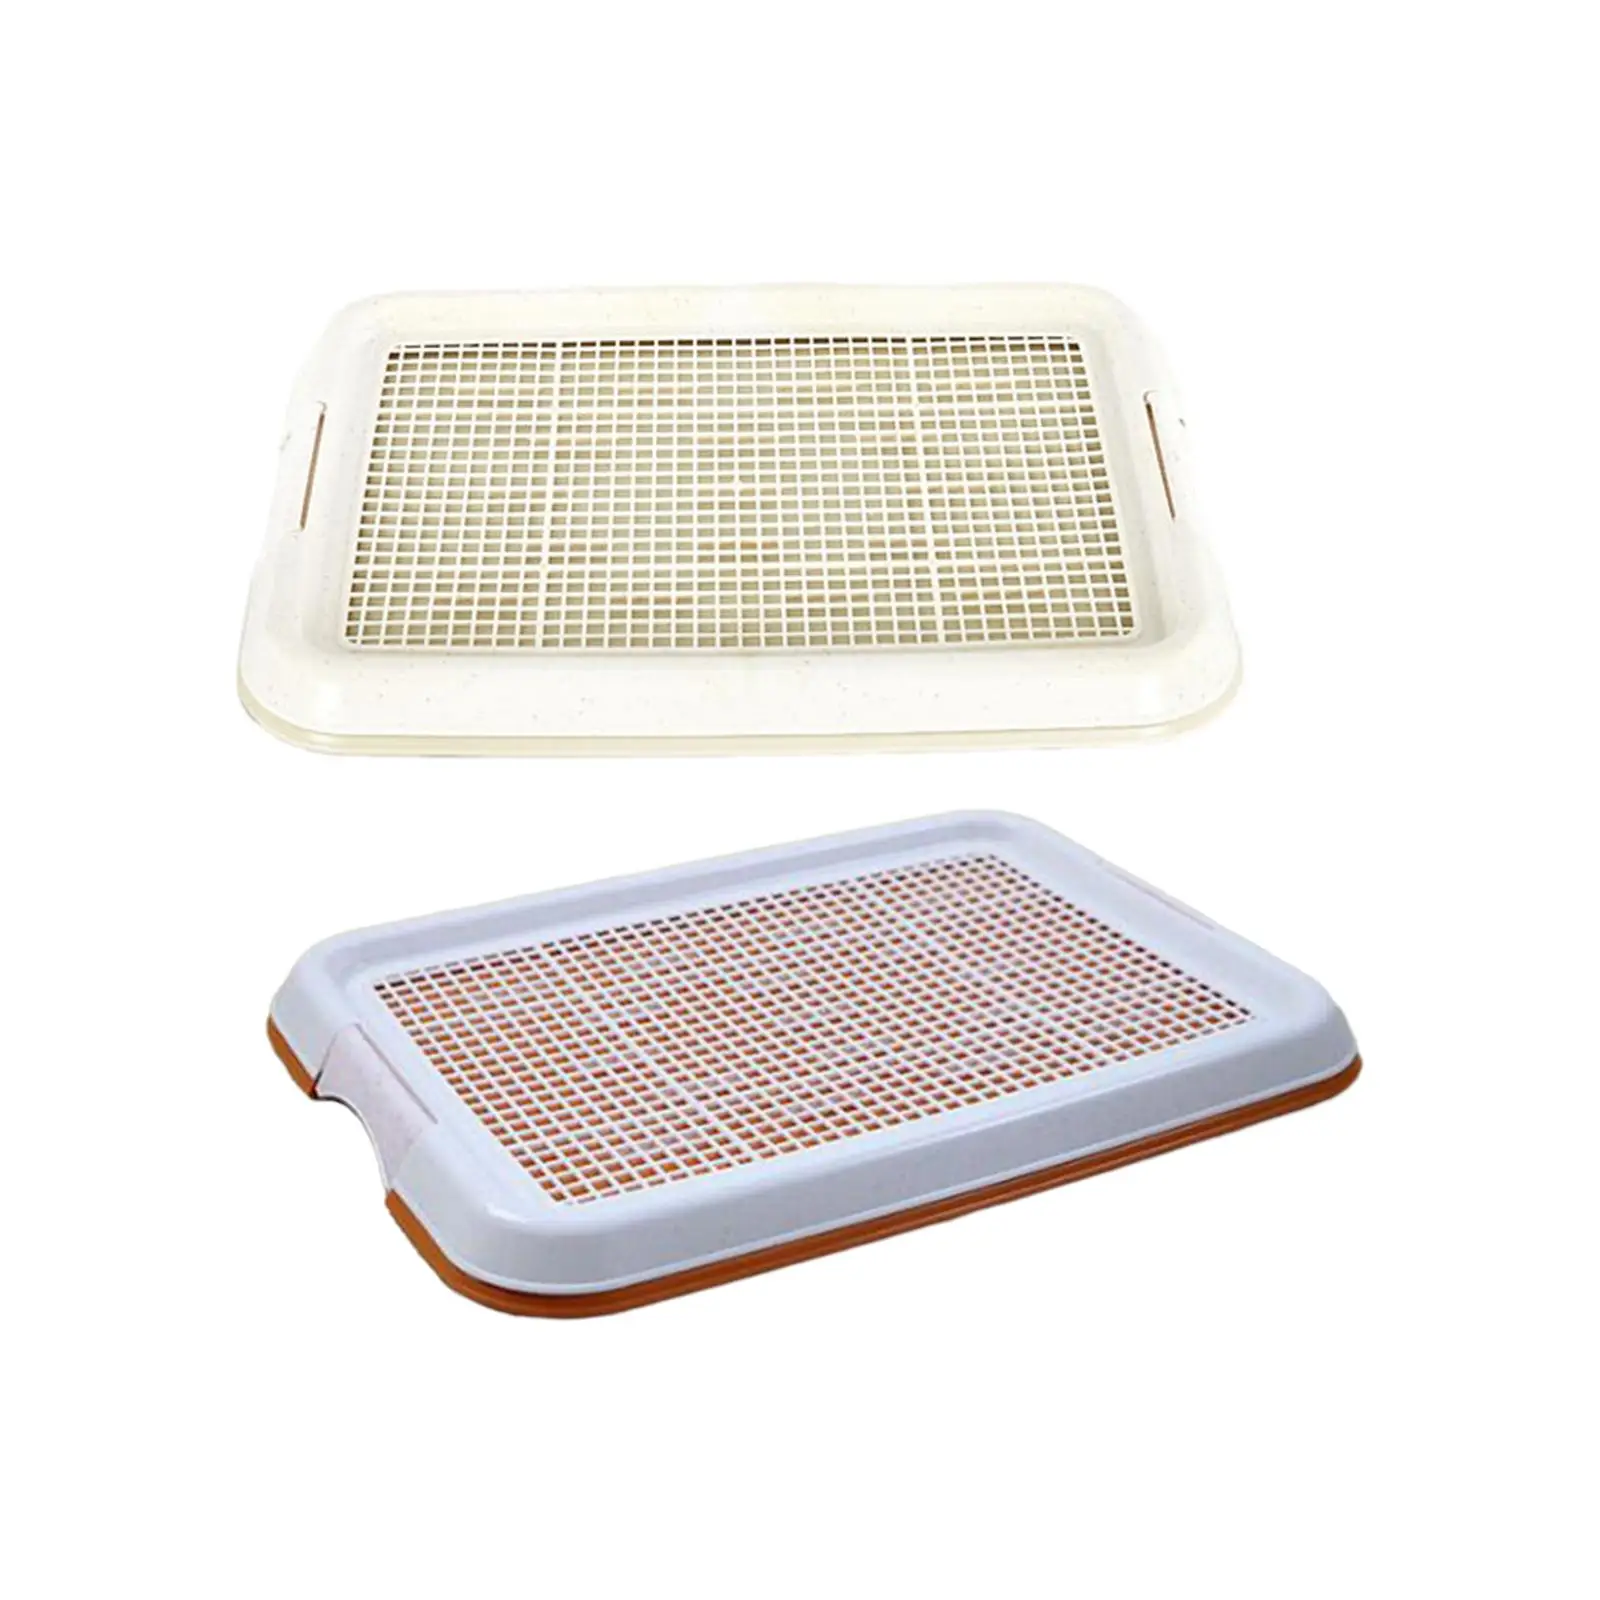 Dog Potty Toilet Training Tray Removable Easy to Clean Puppy Pee Pad Holder Mesh Training Tray for Small Size Dogs Puppy